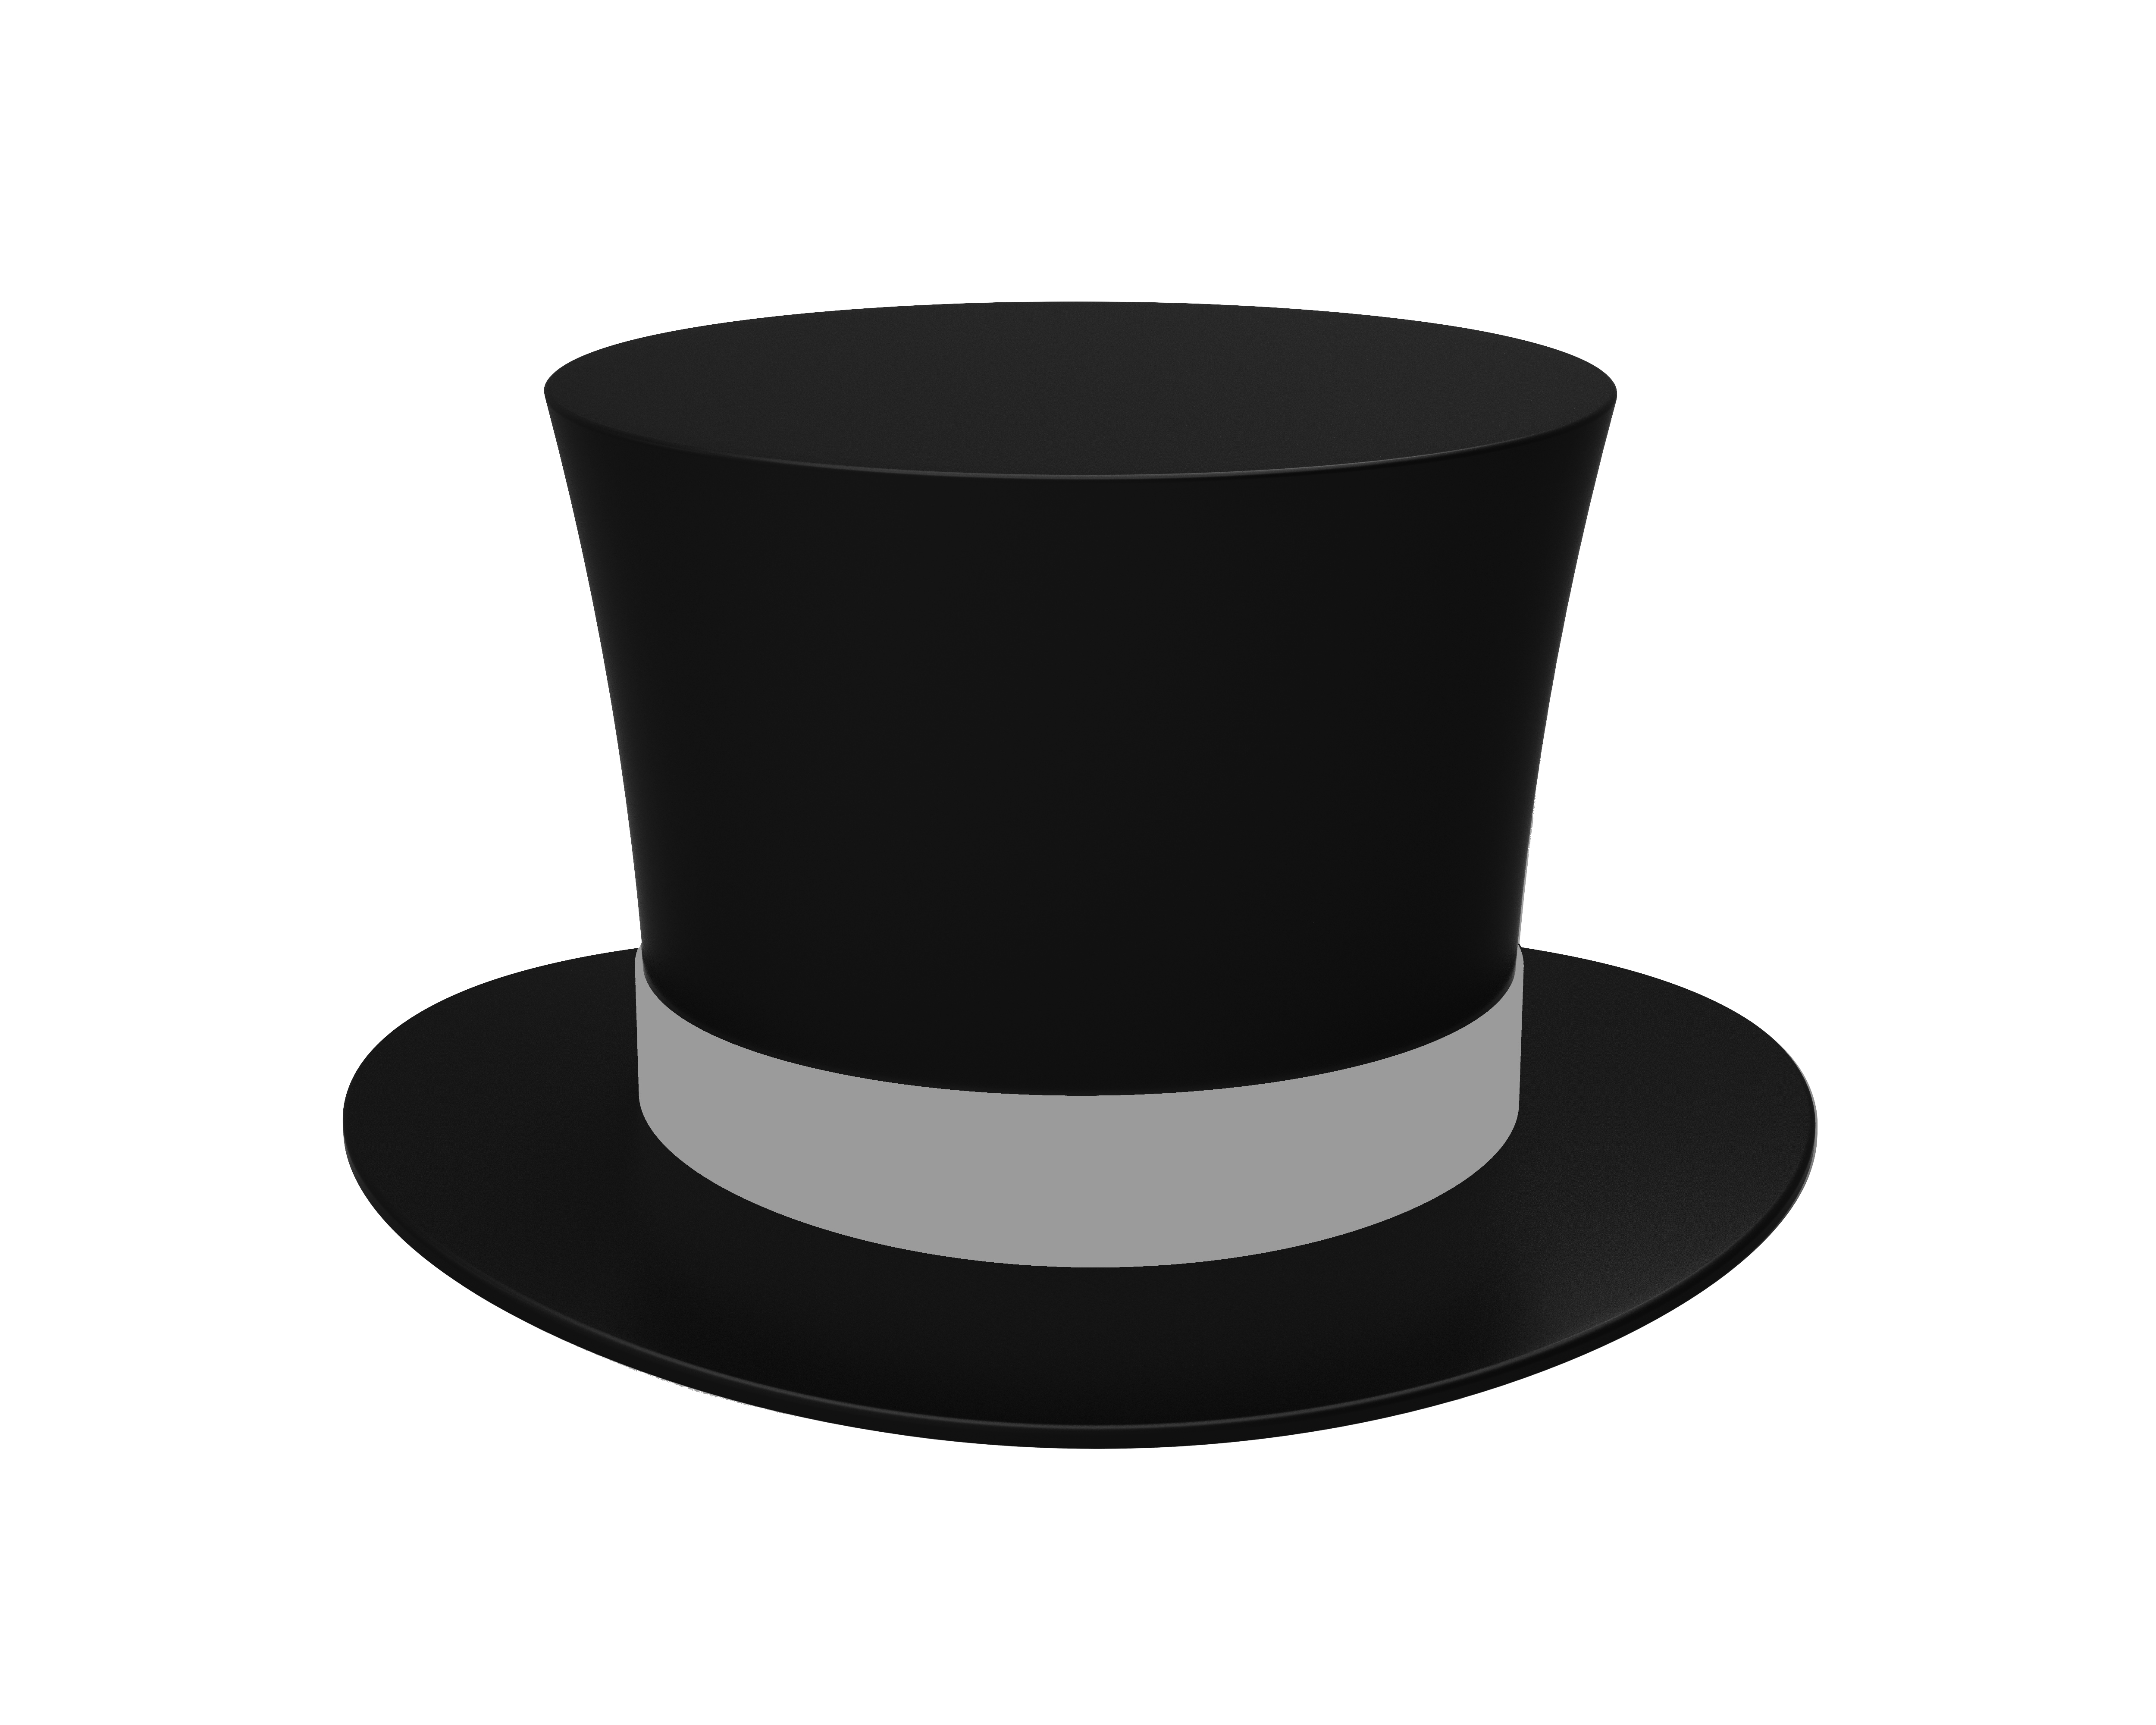 Top Hat PNG